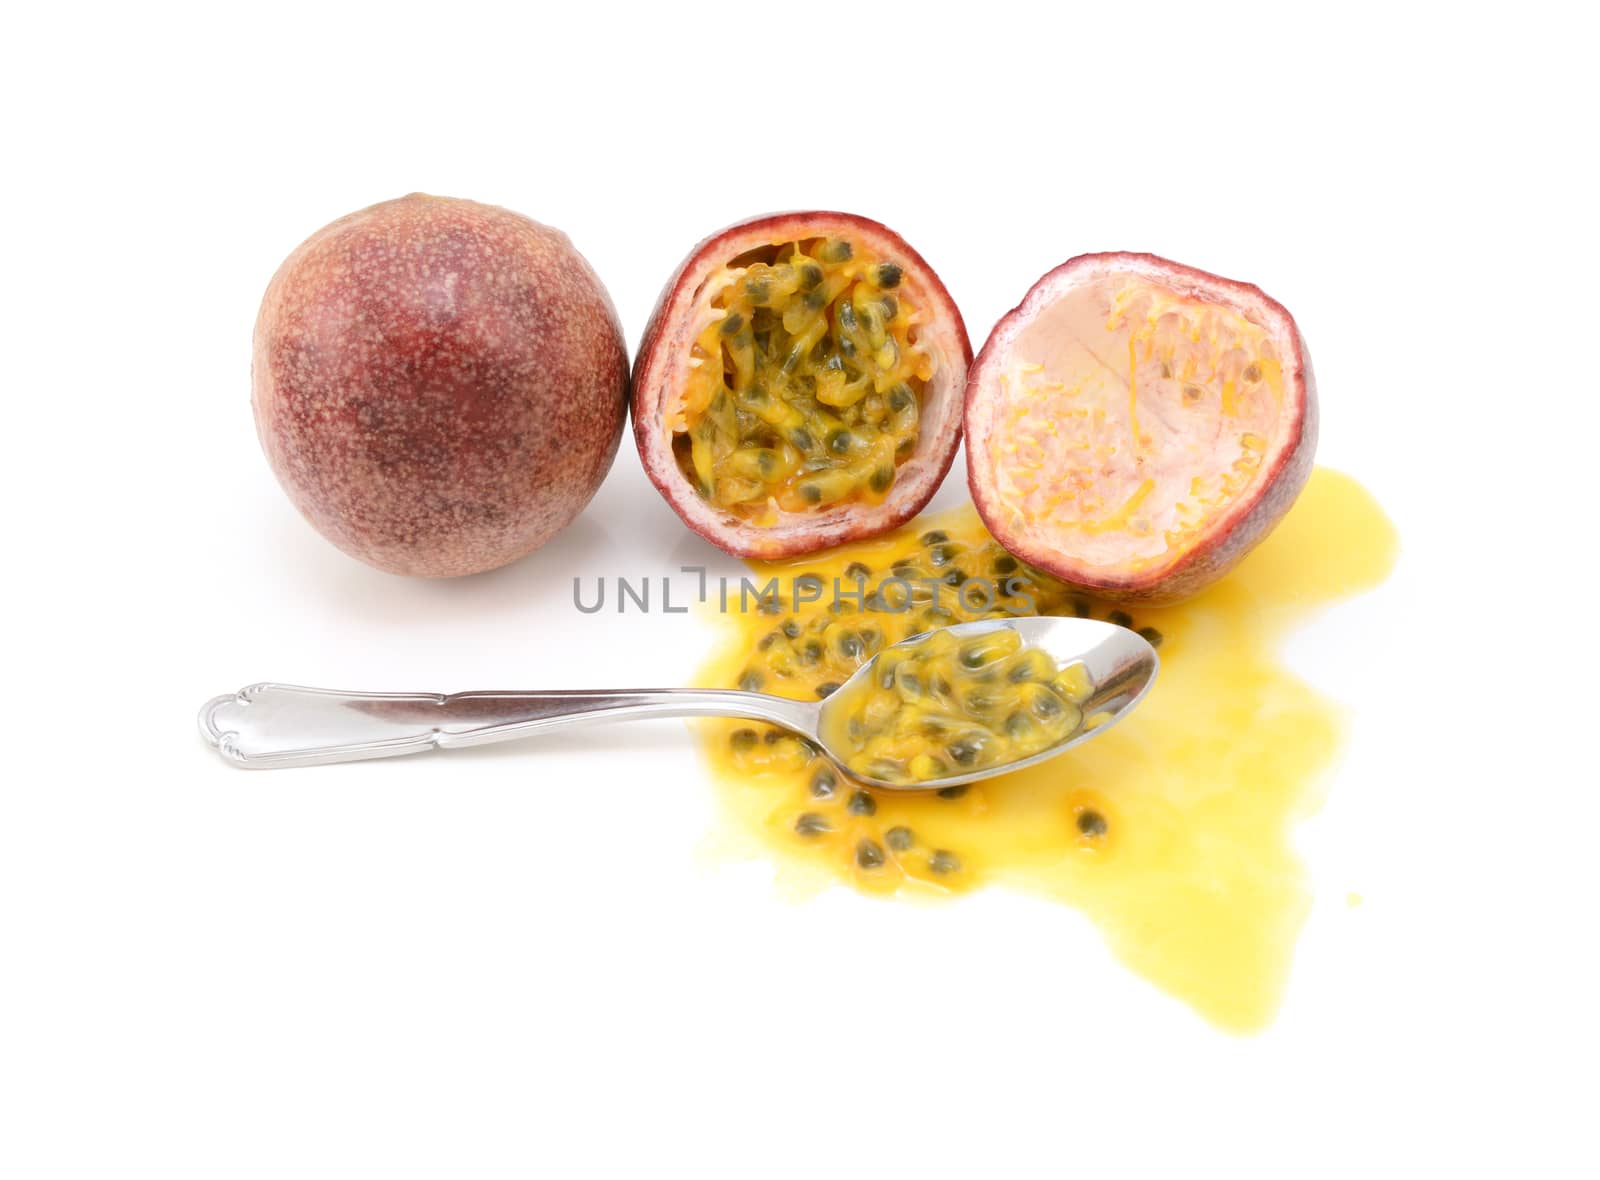 Whole and halved passion fruits ready to eat with a spoon, with spilled juice and sweet seeds, on a white background 